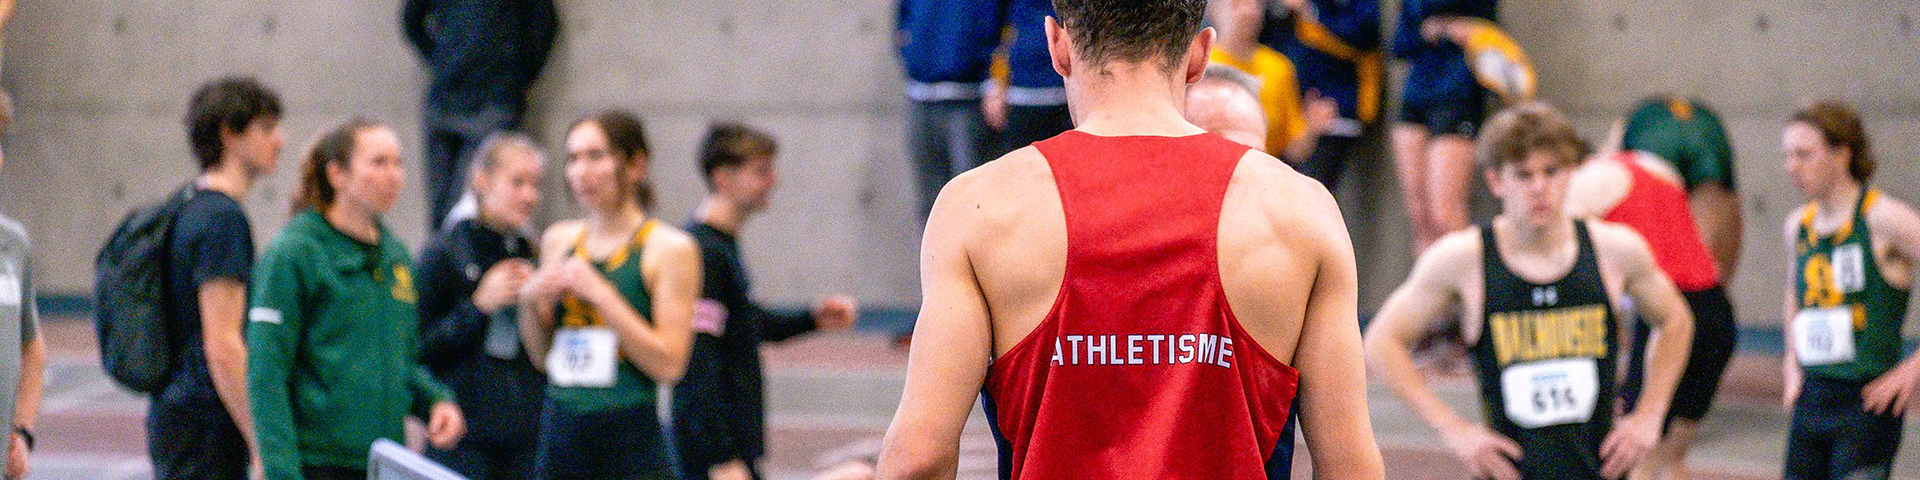 University's athletic team prepared for competition, showcasing sportsmanship and teamwork.